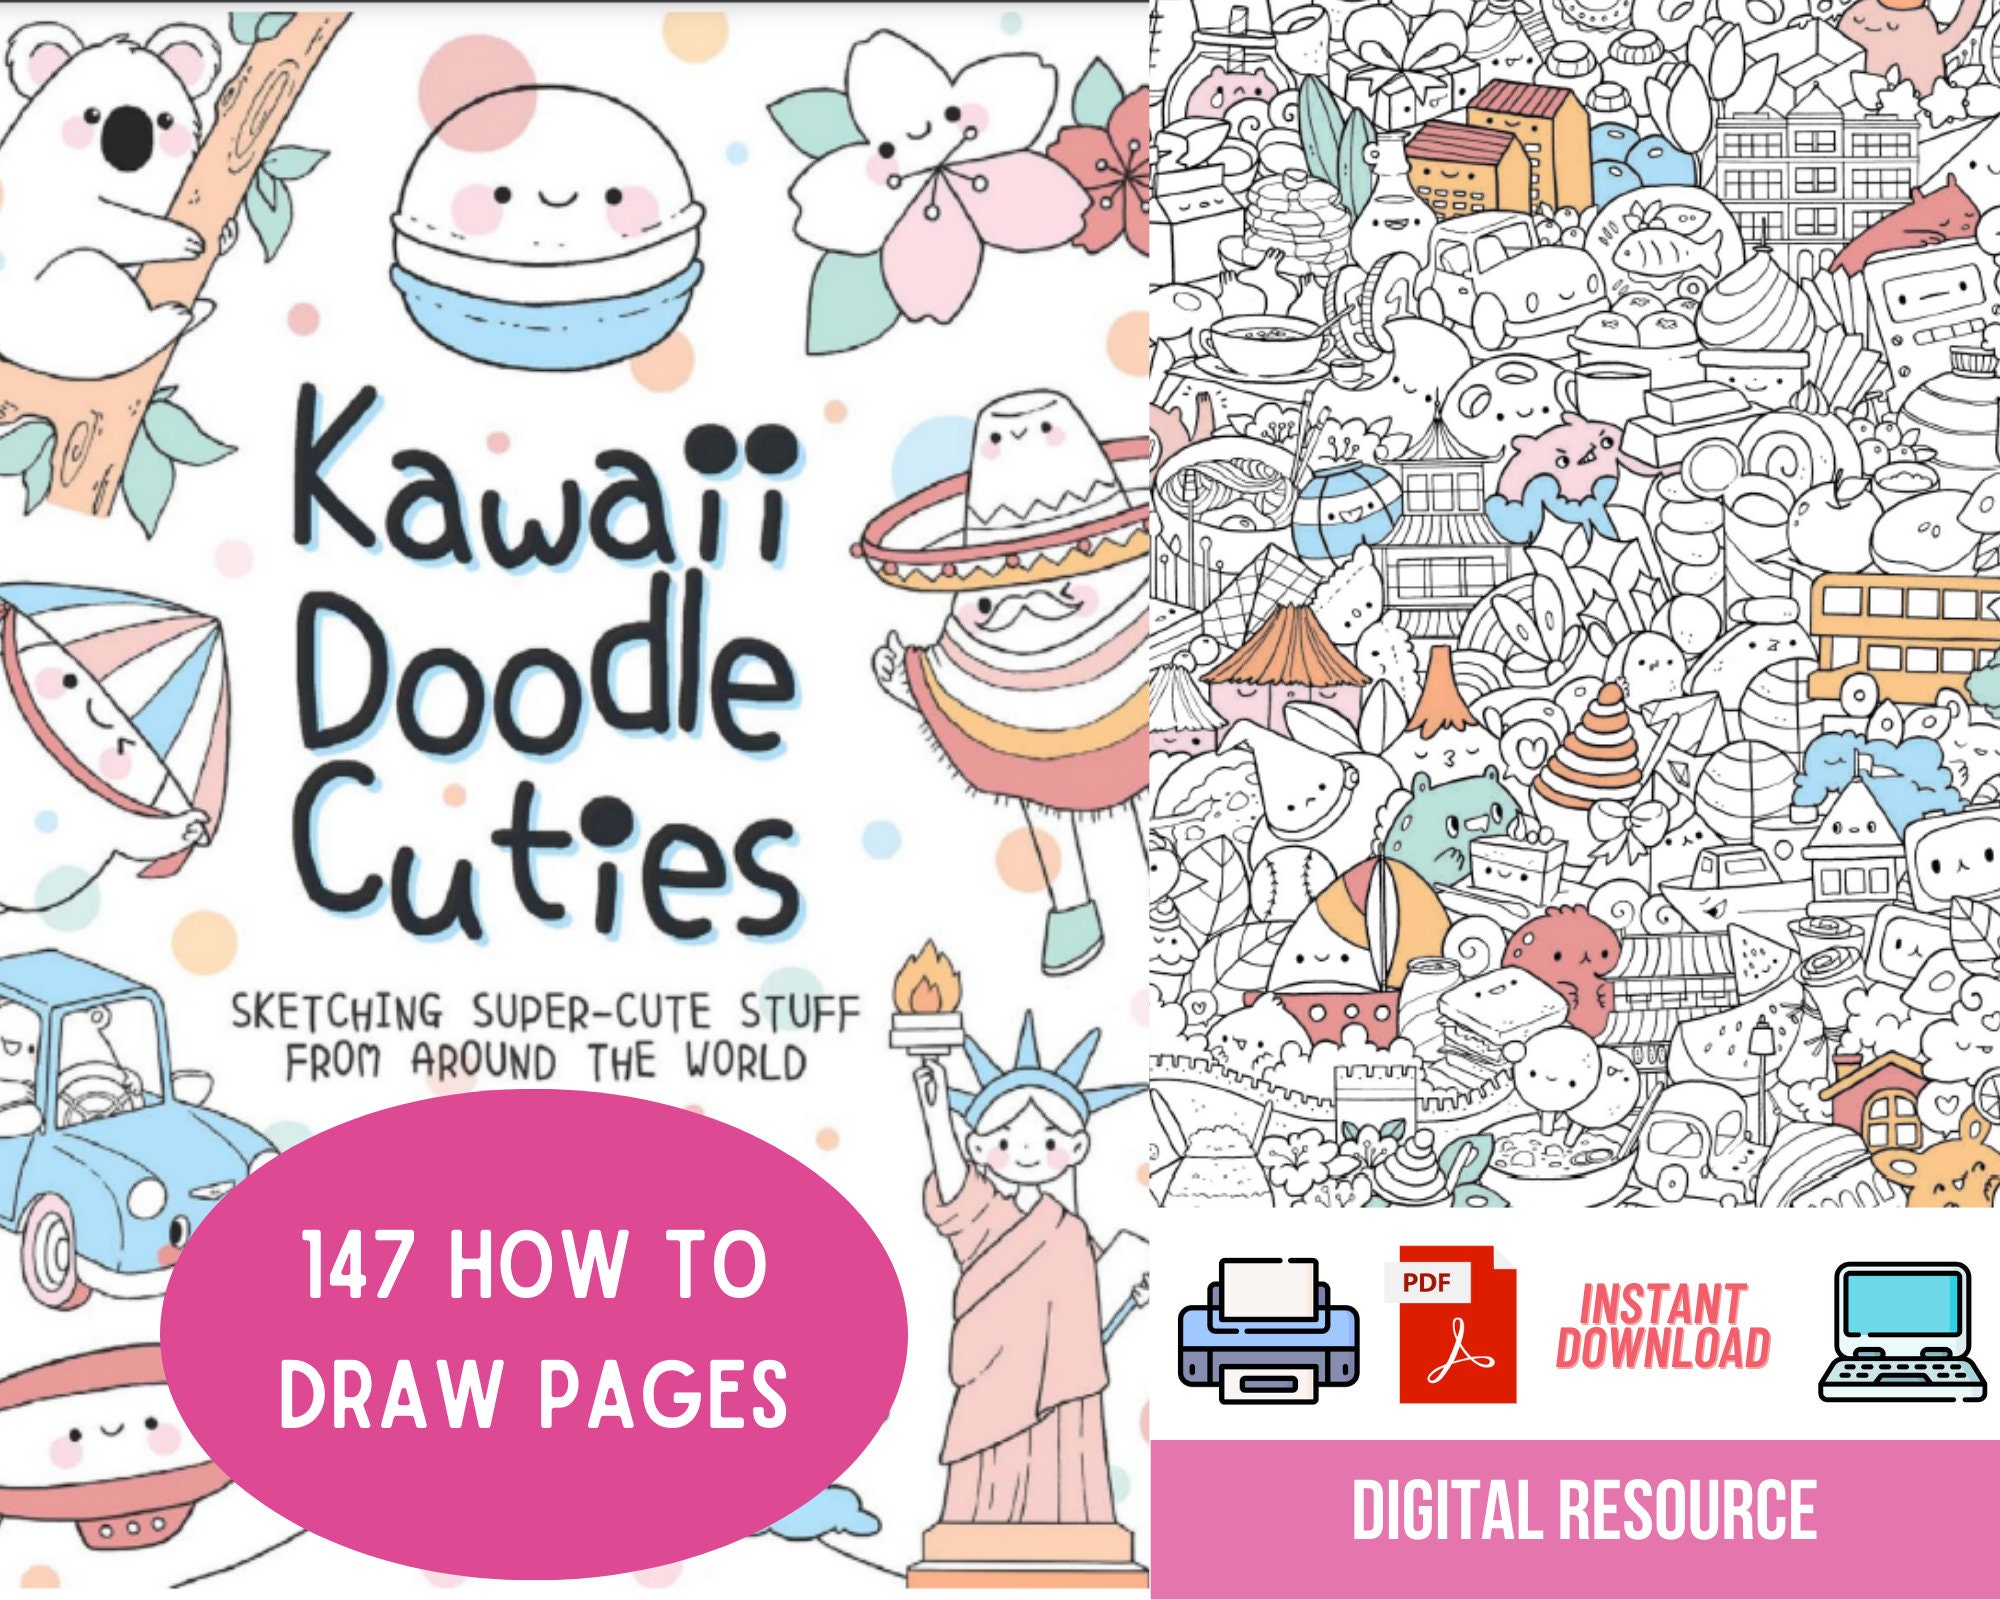 How to Draw Kawaii Doodles, Cute Art Printable Worksheets Art Digital  Download Drawing Book PDF for Kids and Adults, Homeschool Art Resource 